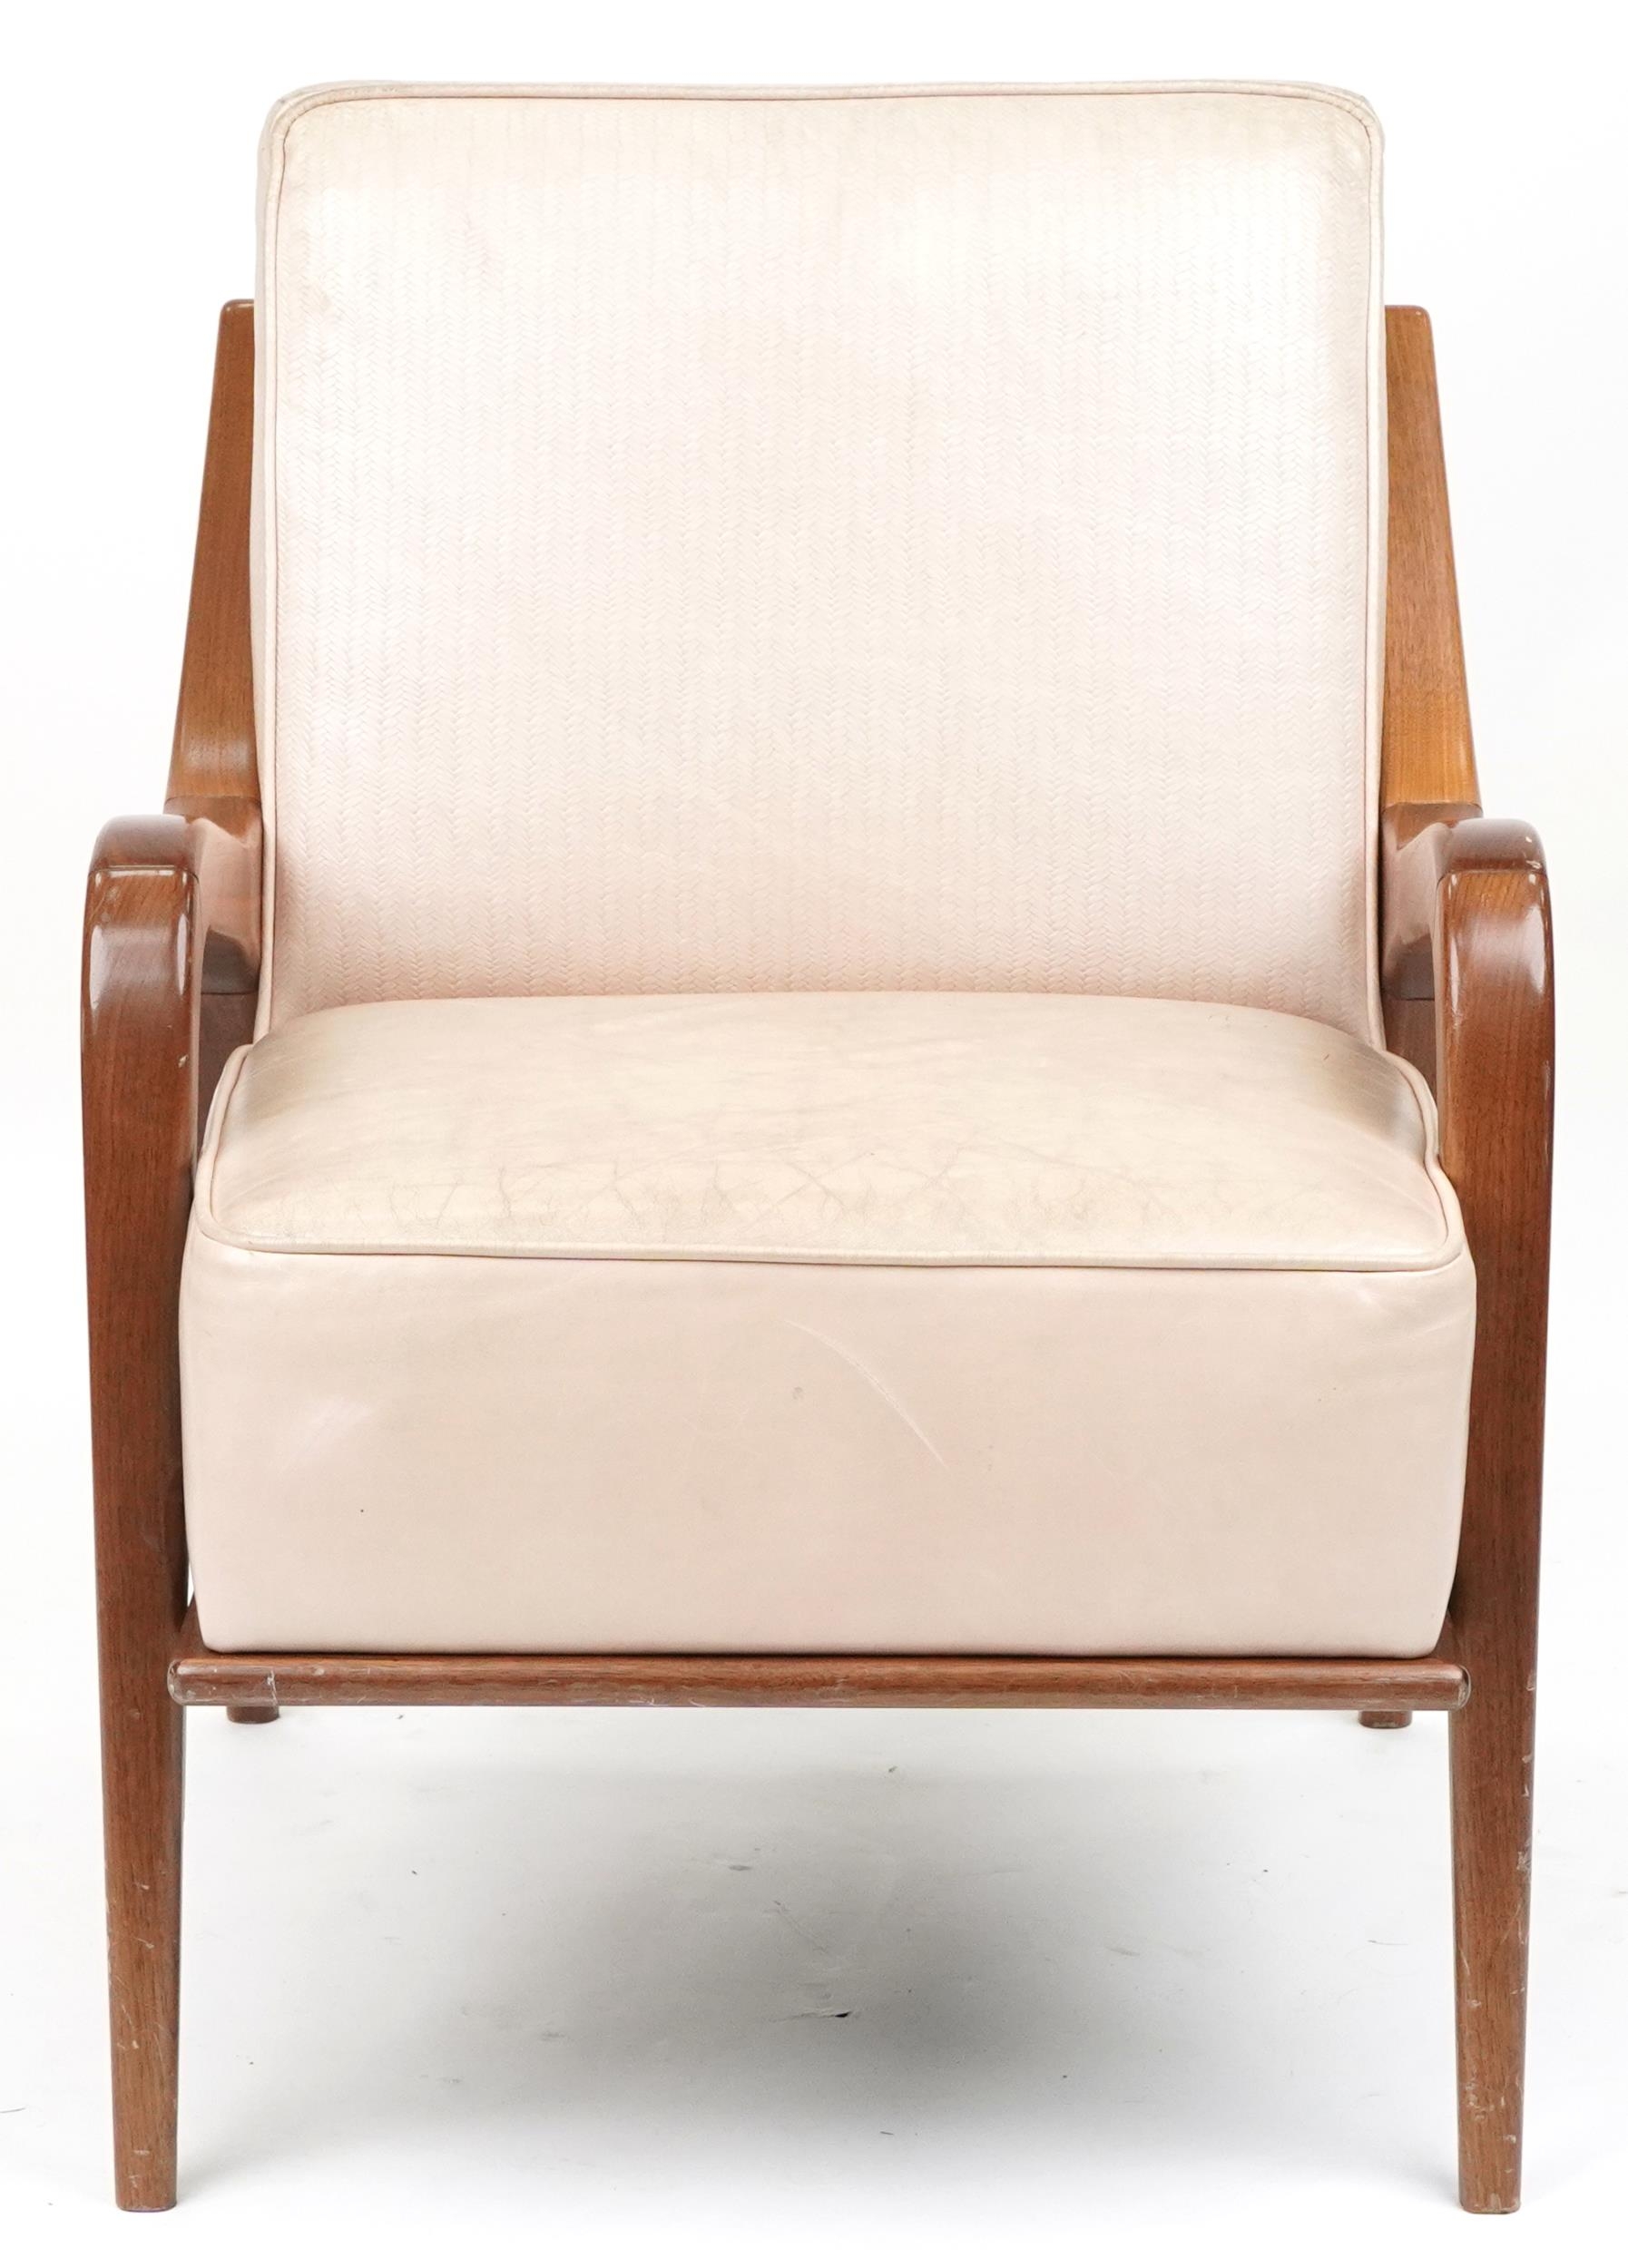 Scandinavian design hardwood lounge chair having a cream upholstered back and seat, 86cm H x 62. - Image 2 of 4